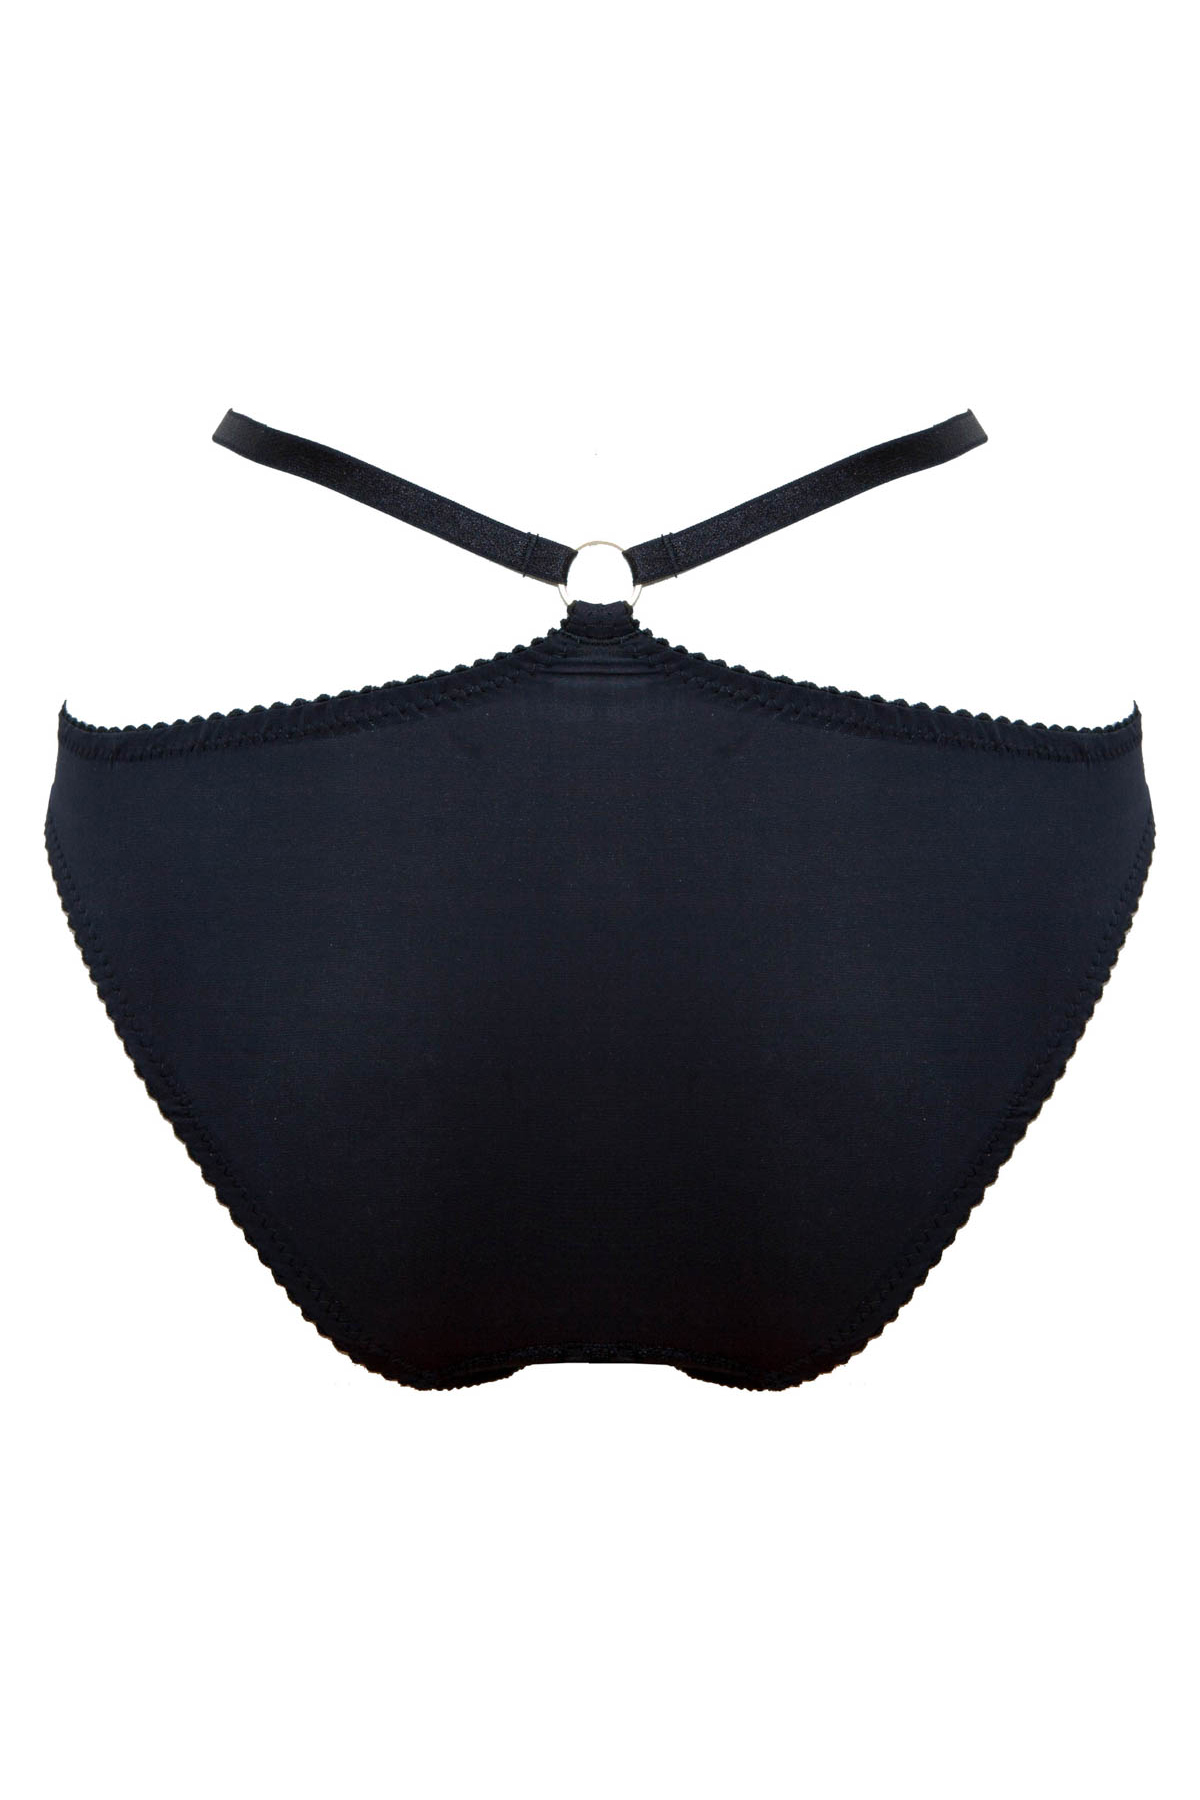 Sif Cut Out Harness Briefs